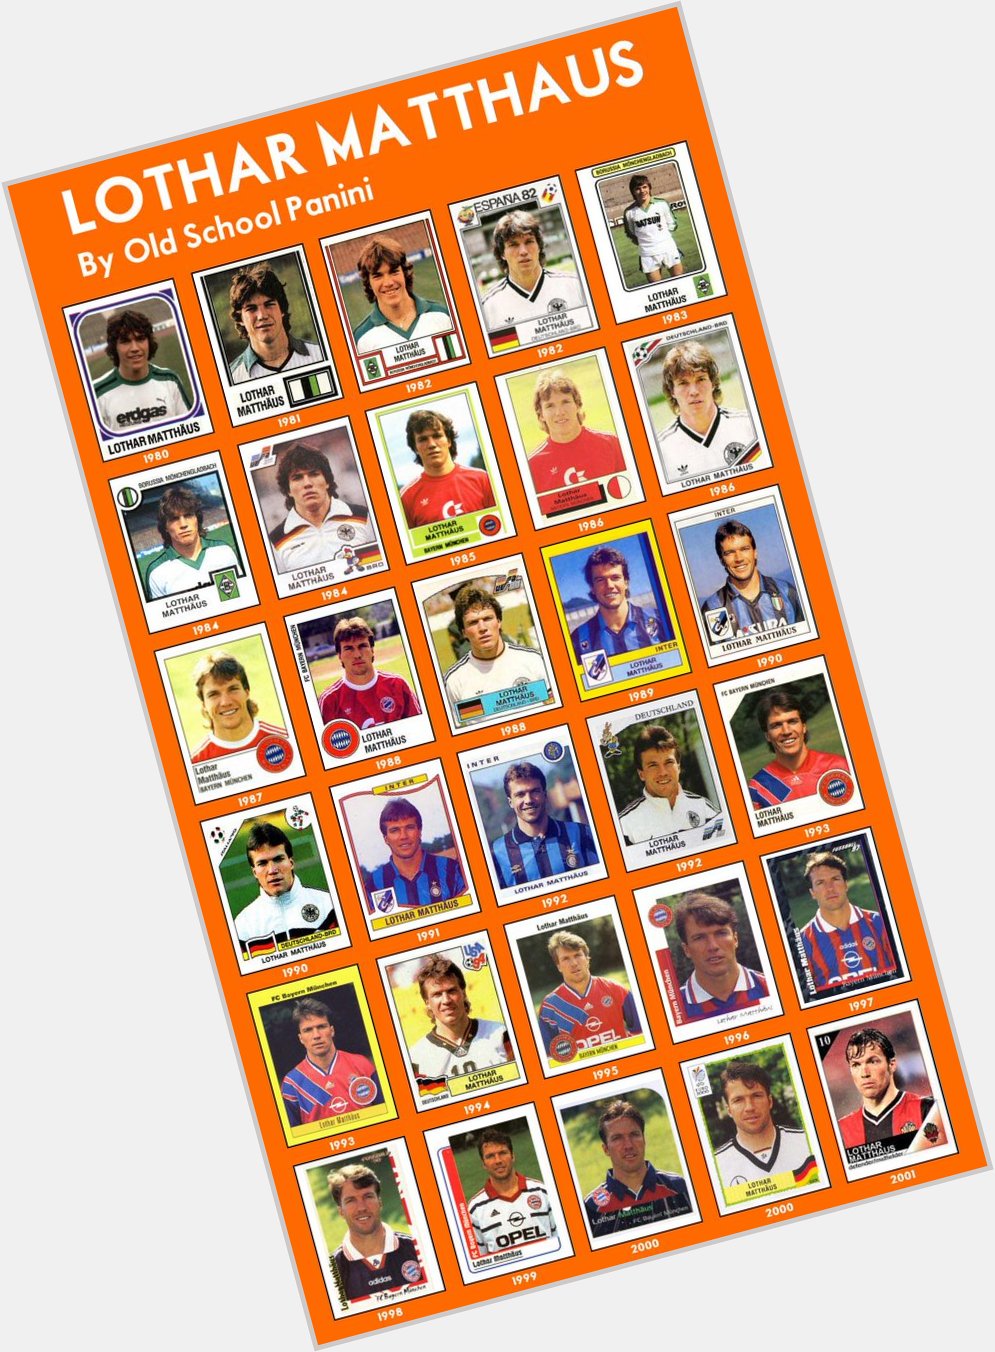 Happy Birthday to Lothar MATTHAUS 
What a huge career. Too Many stickers !! 